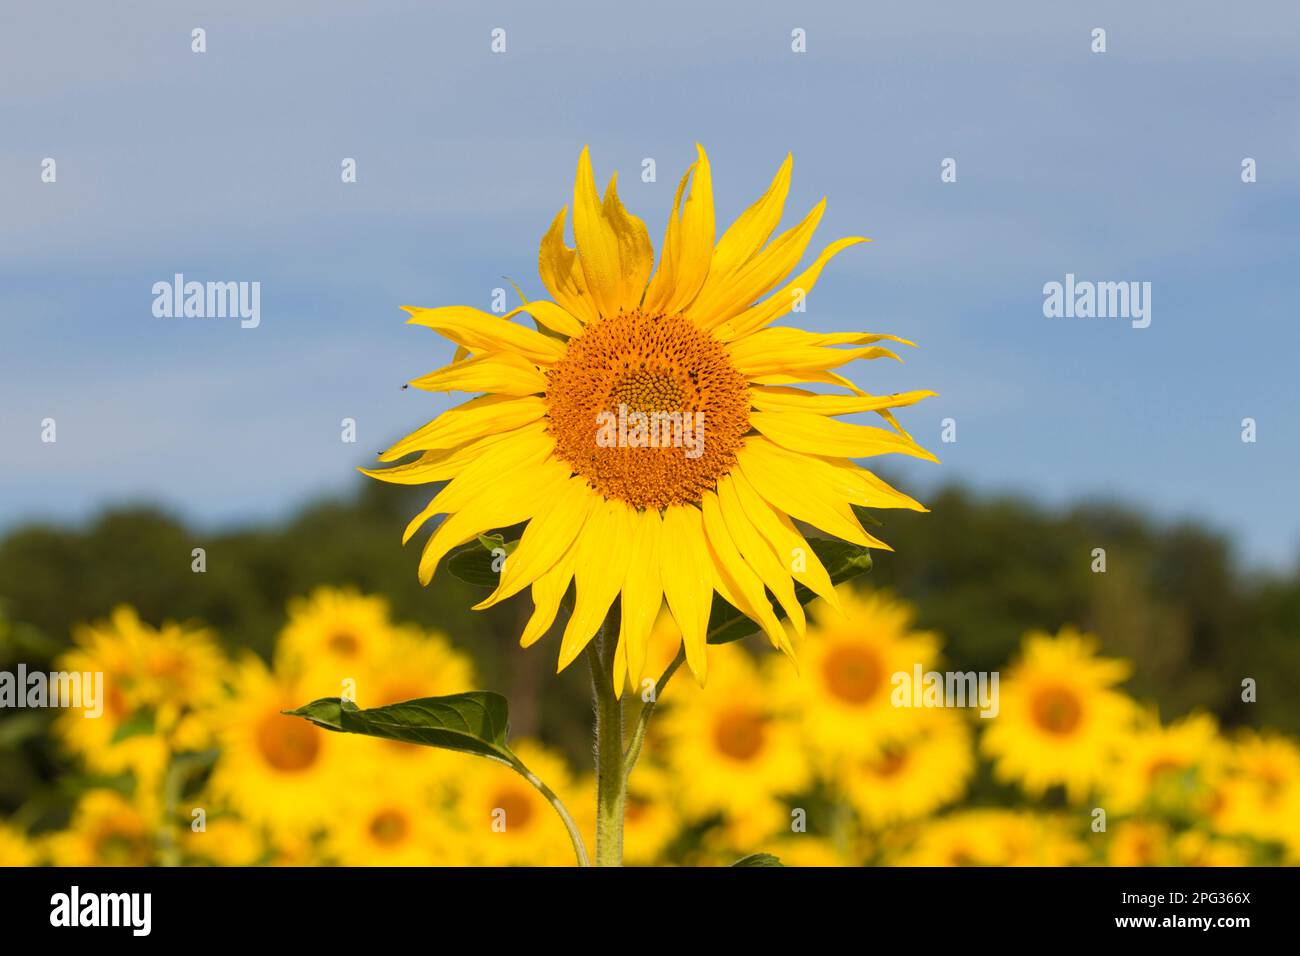 Sunflower (Helianthus annuus). Single flower with fiel in background. Germany Stock Photo